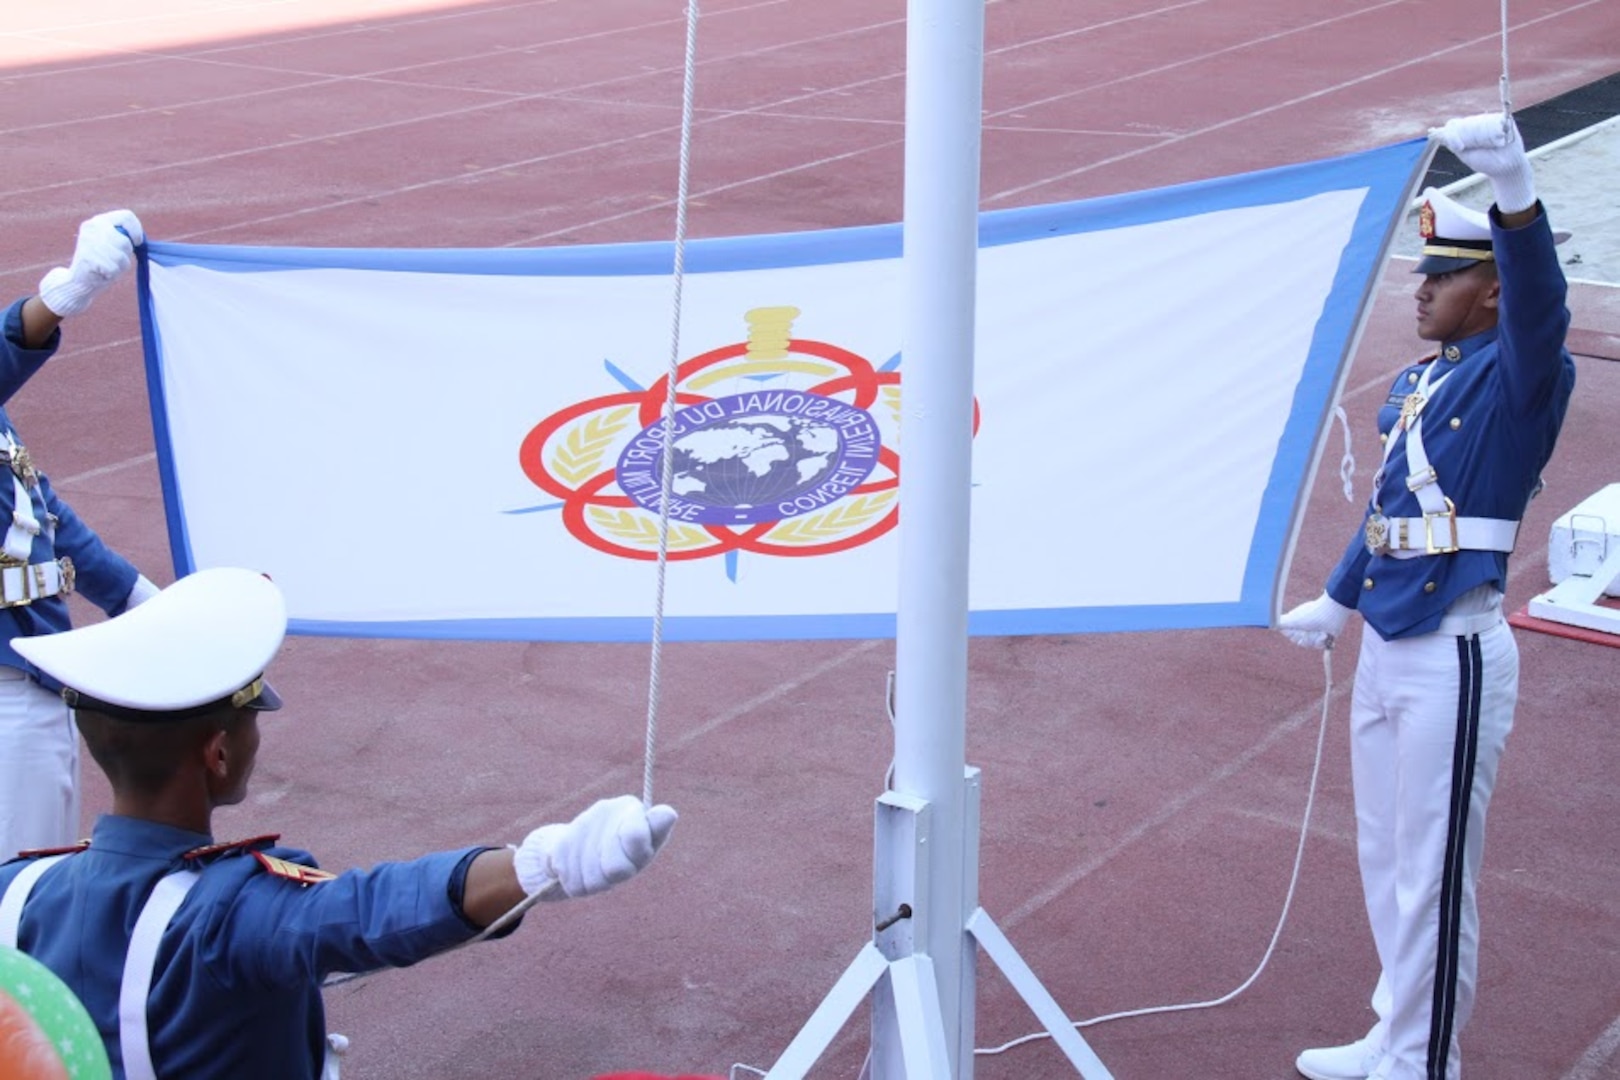 Raising of the CISM Flag during the opening ceremony of the 38th Conseil International du Sport Militaire (CISM) in Solo, Indonesia 17-28 September